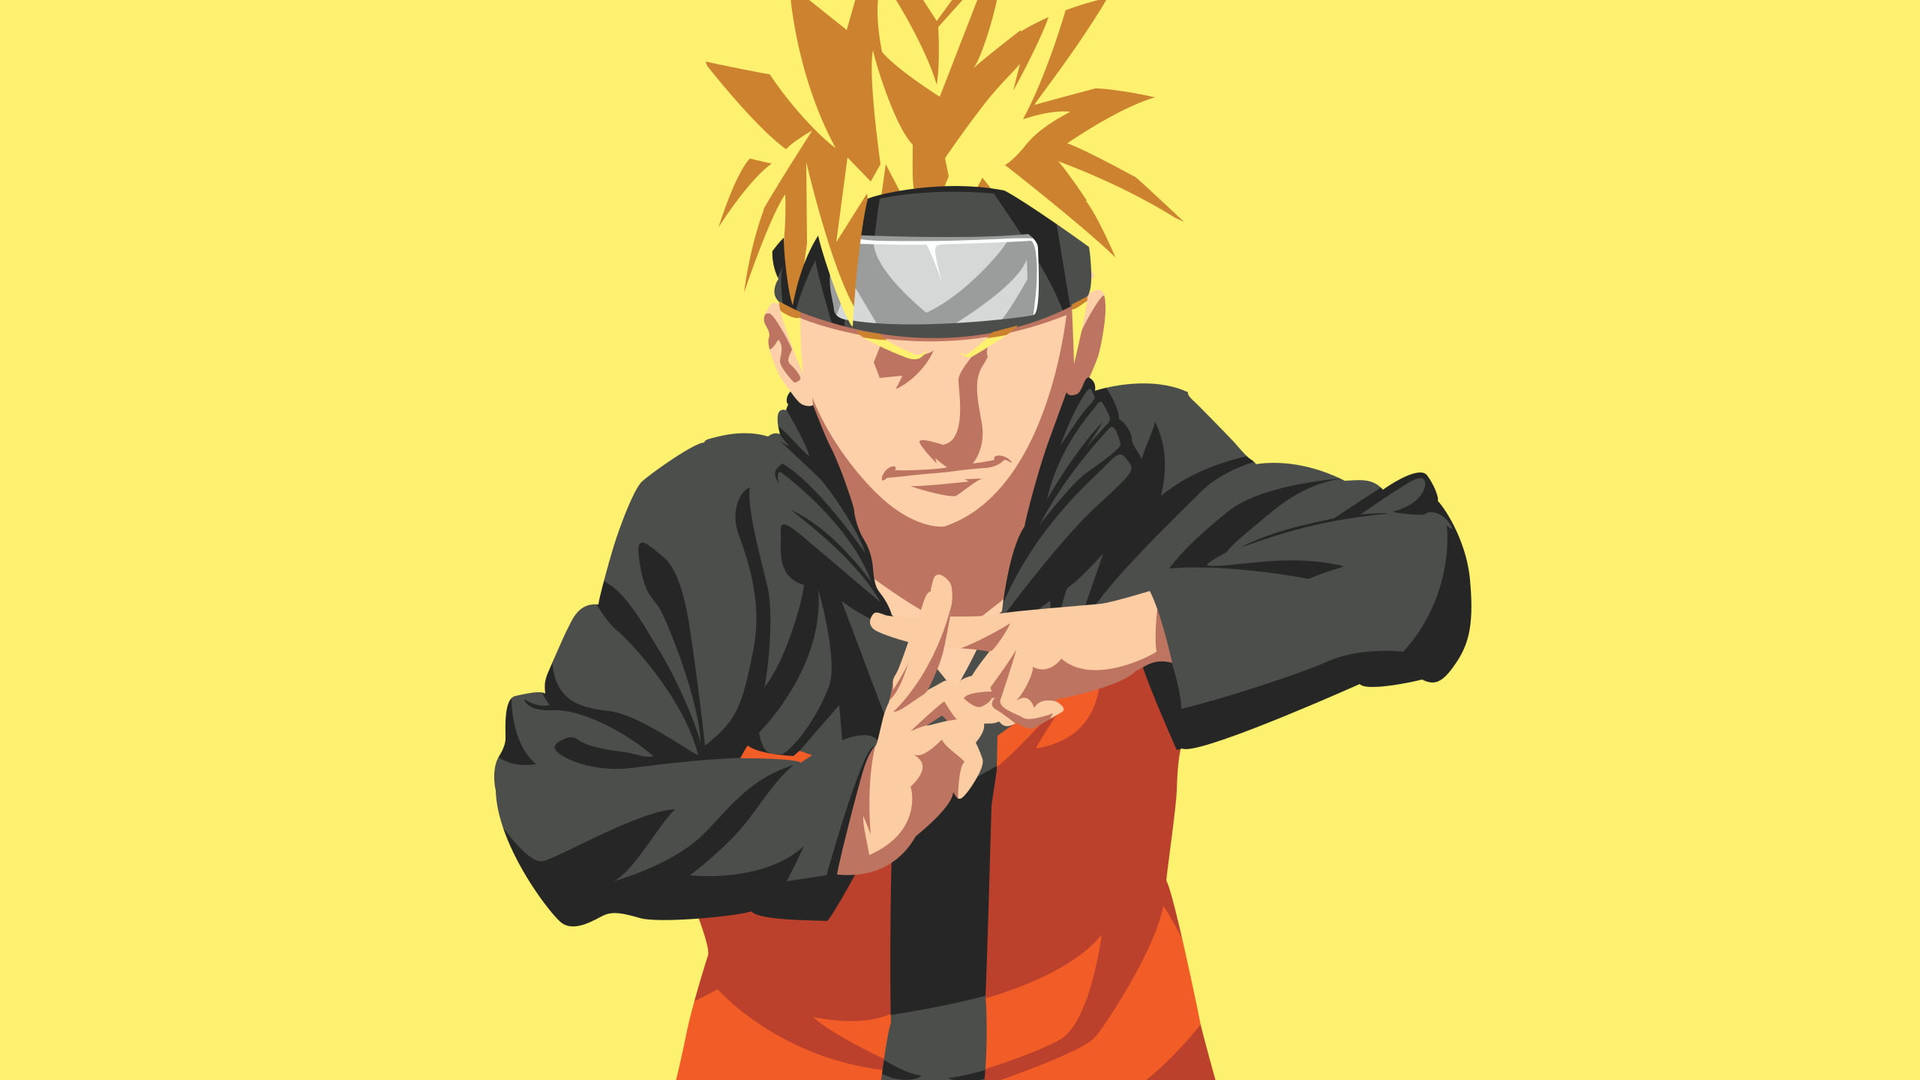 Moving Naruto Yellow Vector Art Background